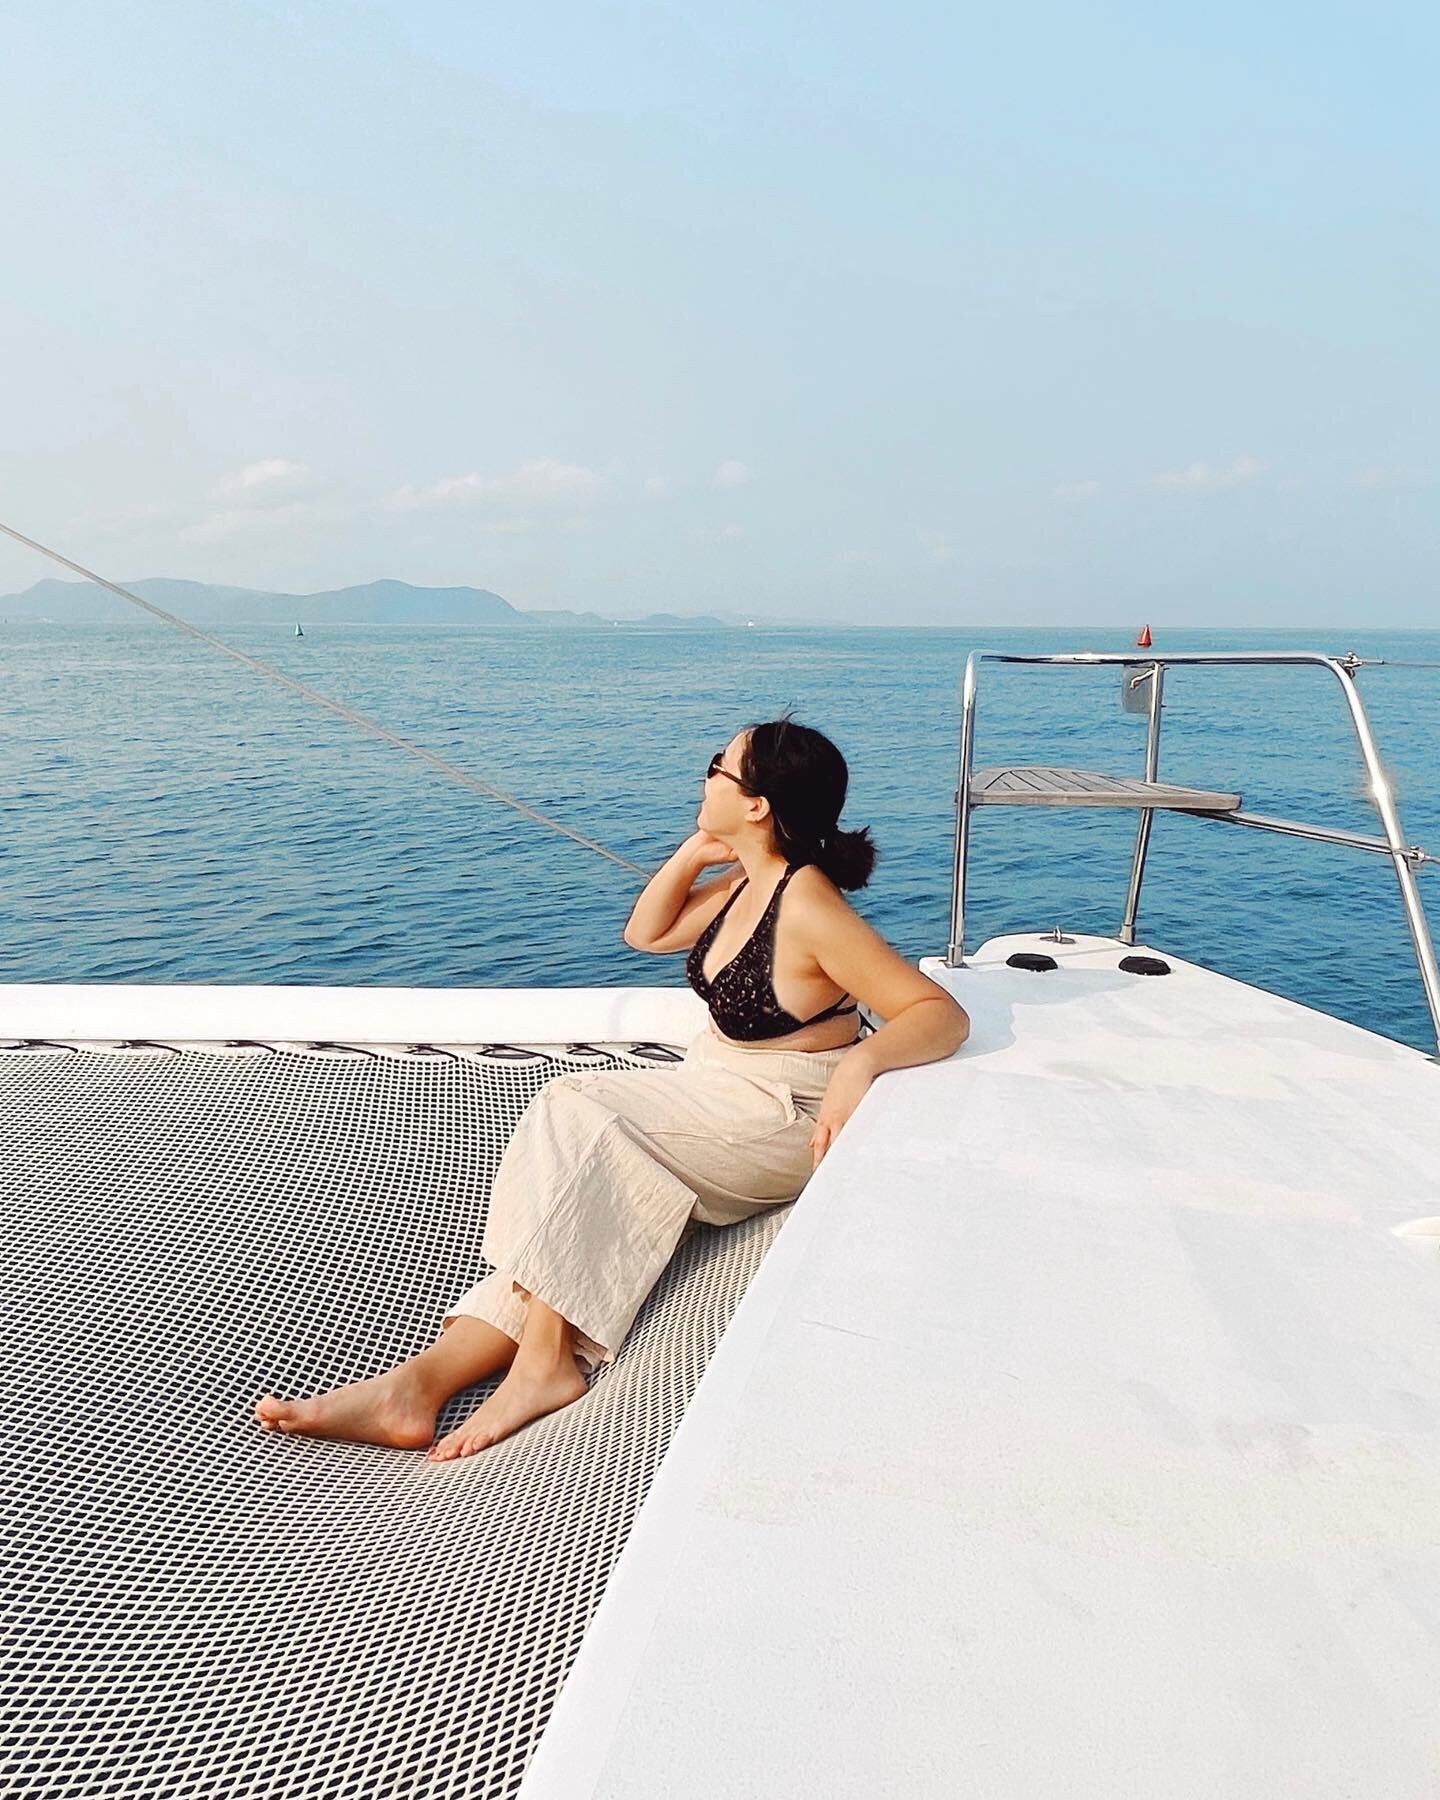 Our sailing catamaran is always a good idea! 🌞 Whether you&rsquo;re looking for some afternoon fun with friends or are celebrating a special occasion, 𝗢𝗰𝗲𝗮𝗻 𝗠𝗮𝗿𝗶𝗻𝗮 𝗬𝗮𝗰𝗵𝘁 𝗖𝗵𝗮𝗿𝘁𝗲𝗿 can help you create the perfect experience.

Cho